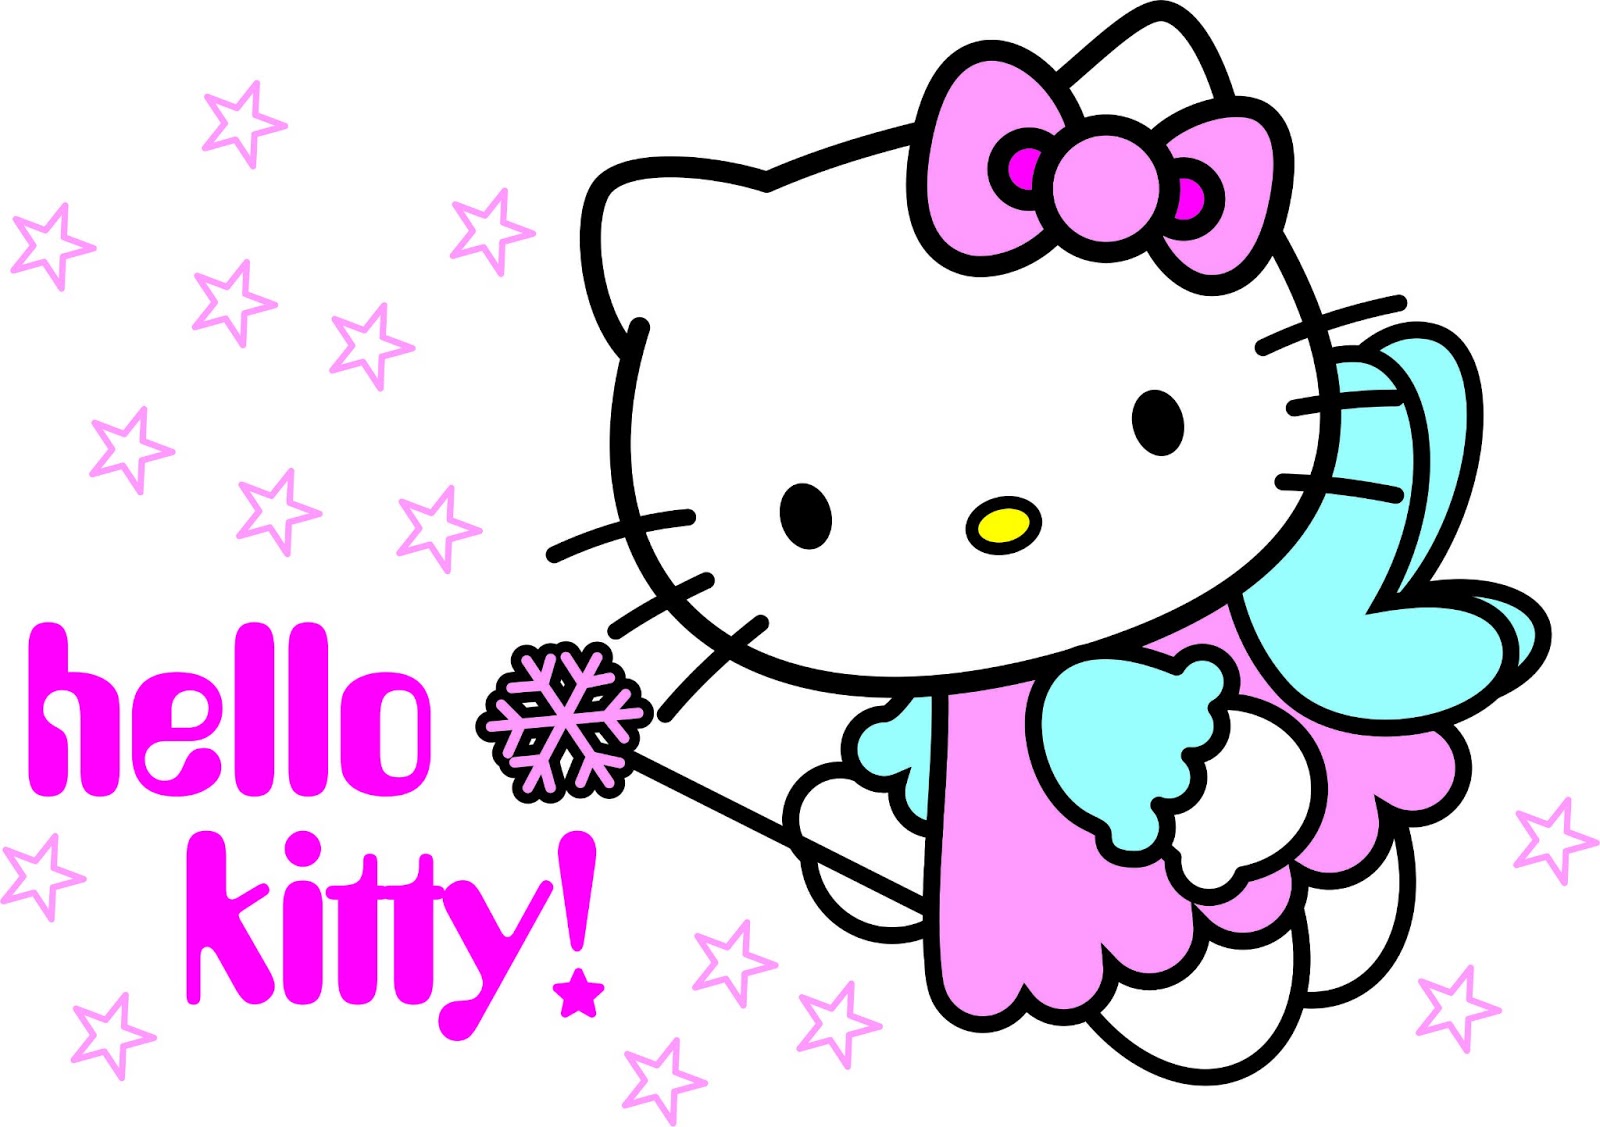 hello kitty clipart download - photo #28